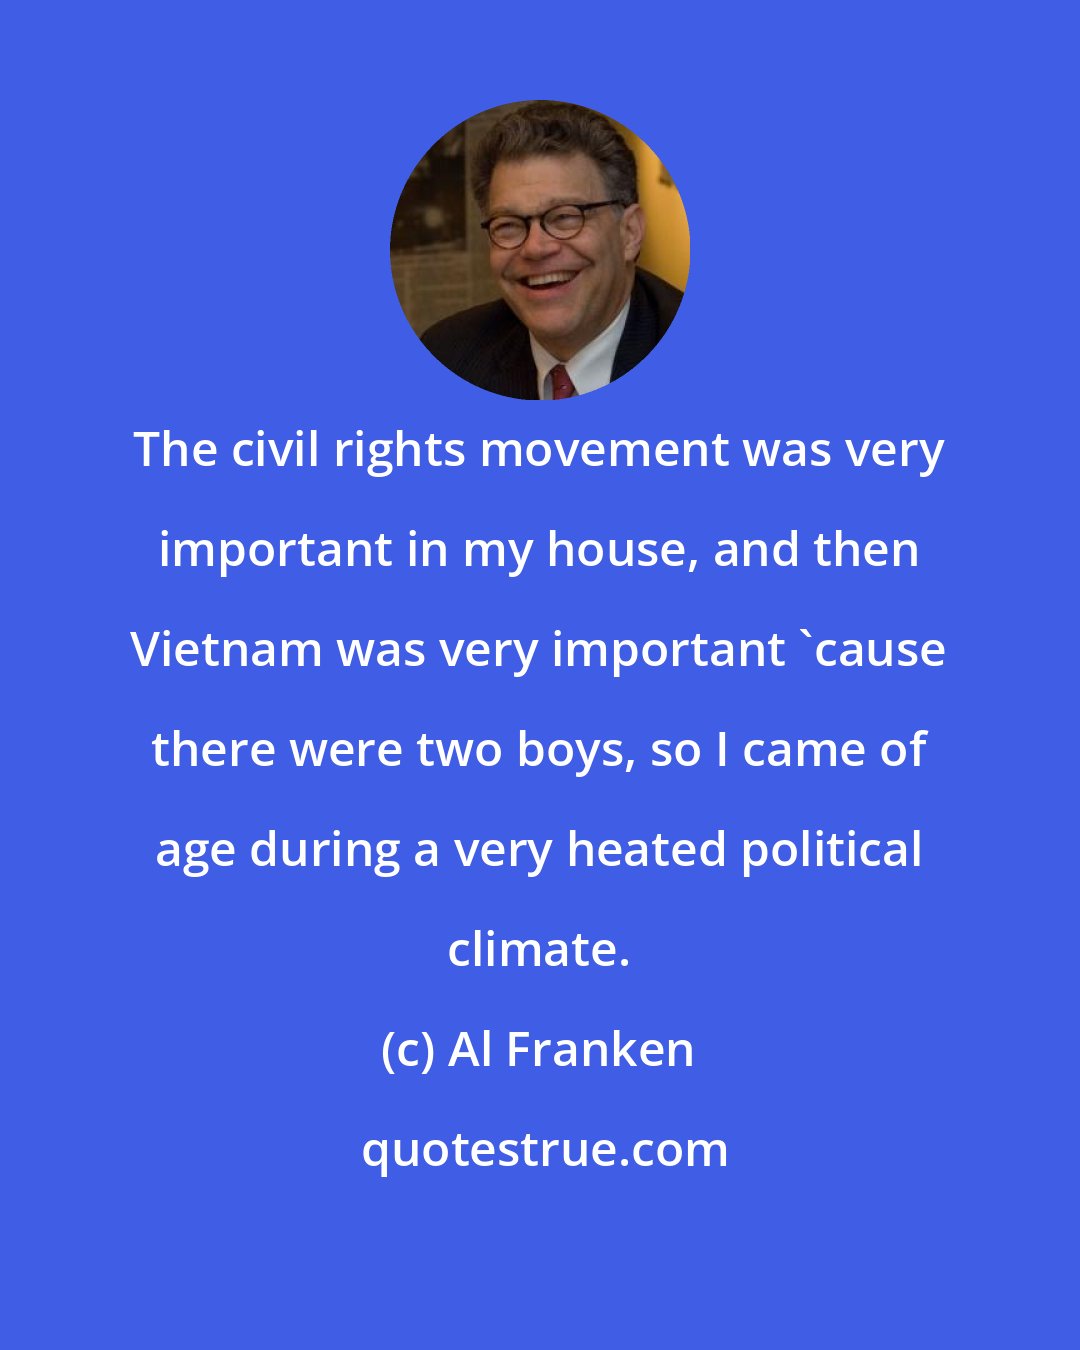 Al Franken: The civil rights movement was very important in my house, and then Vietnam was very important 'cause there were two boys, so I came of age during a very heated political climate.